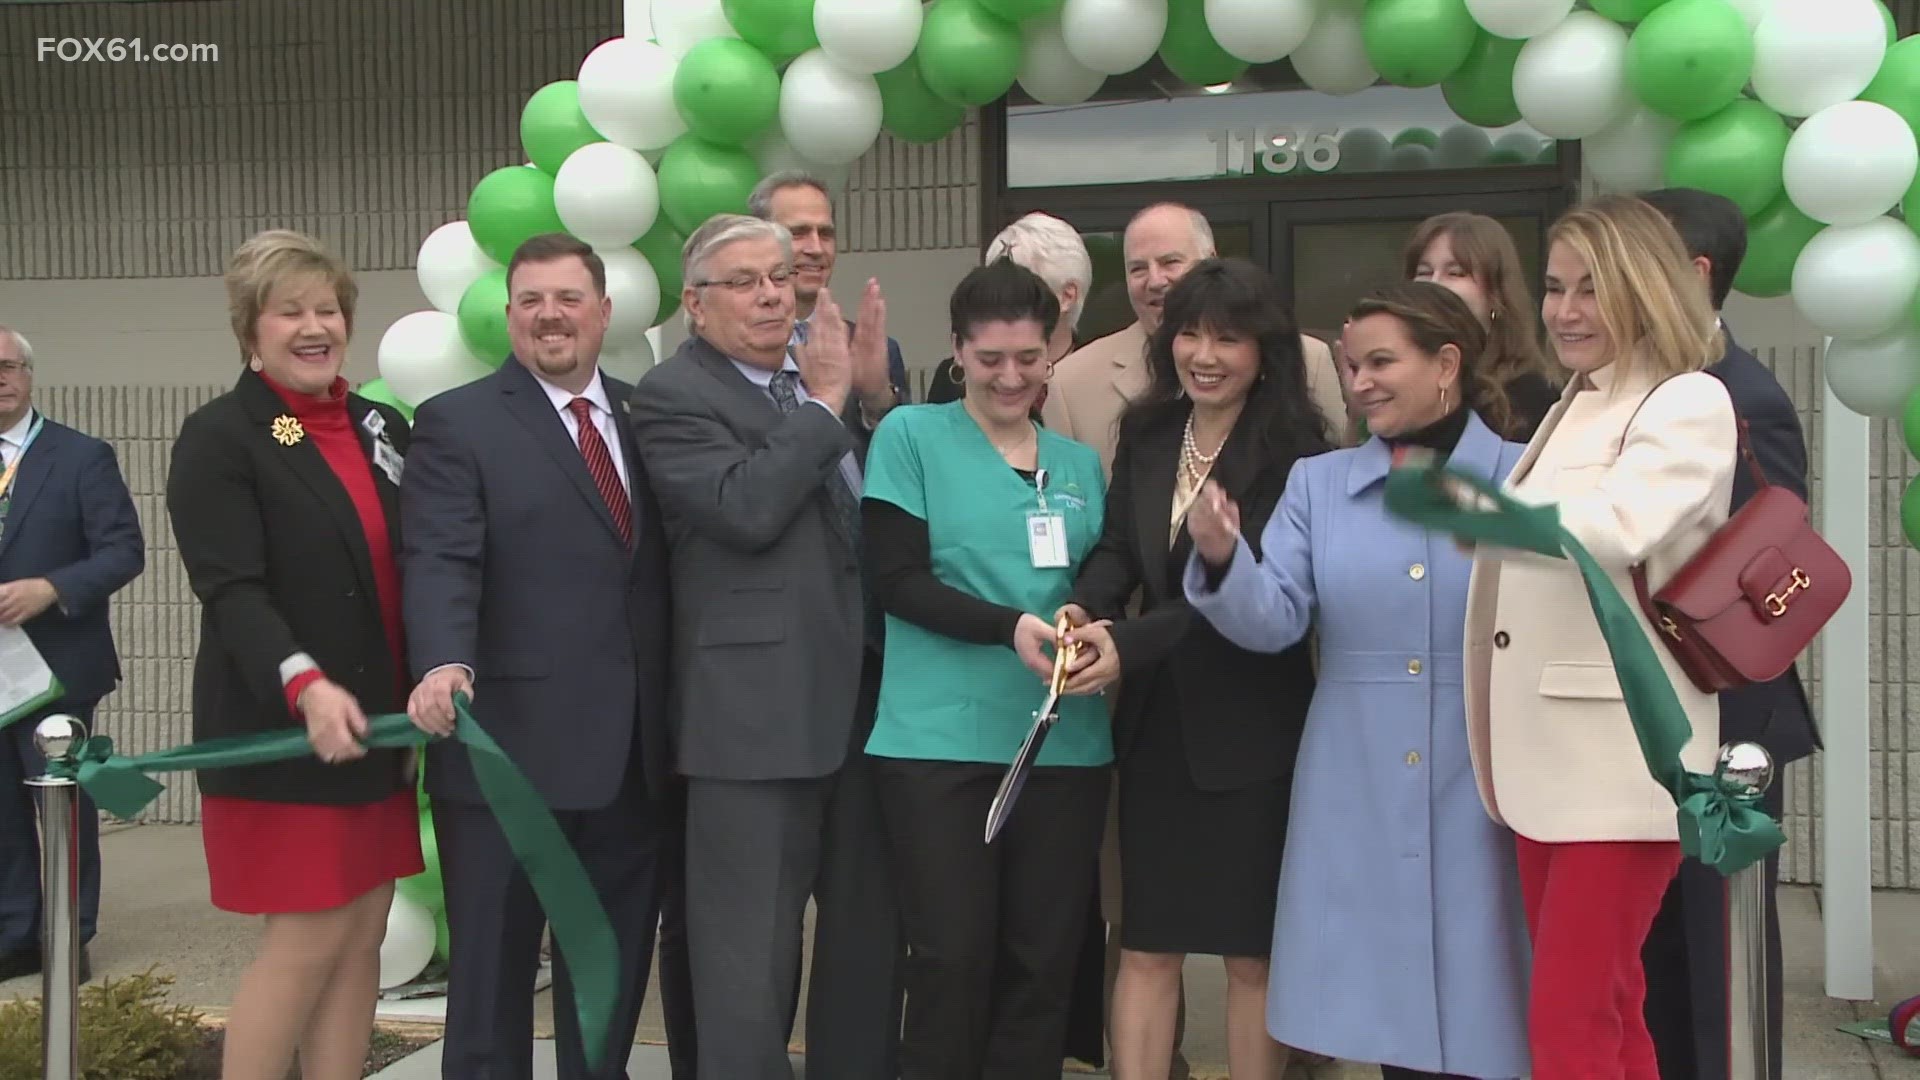 A new building was opened to meet the needs for students who were left abandoned could finish learning.